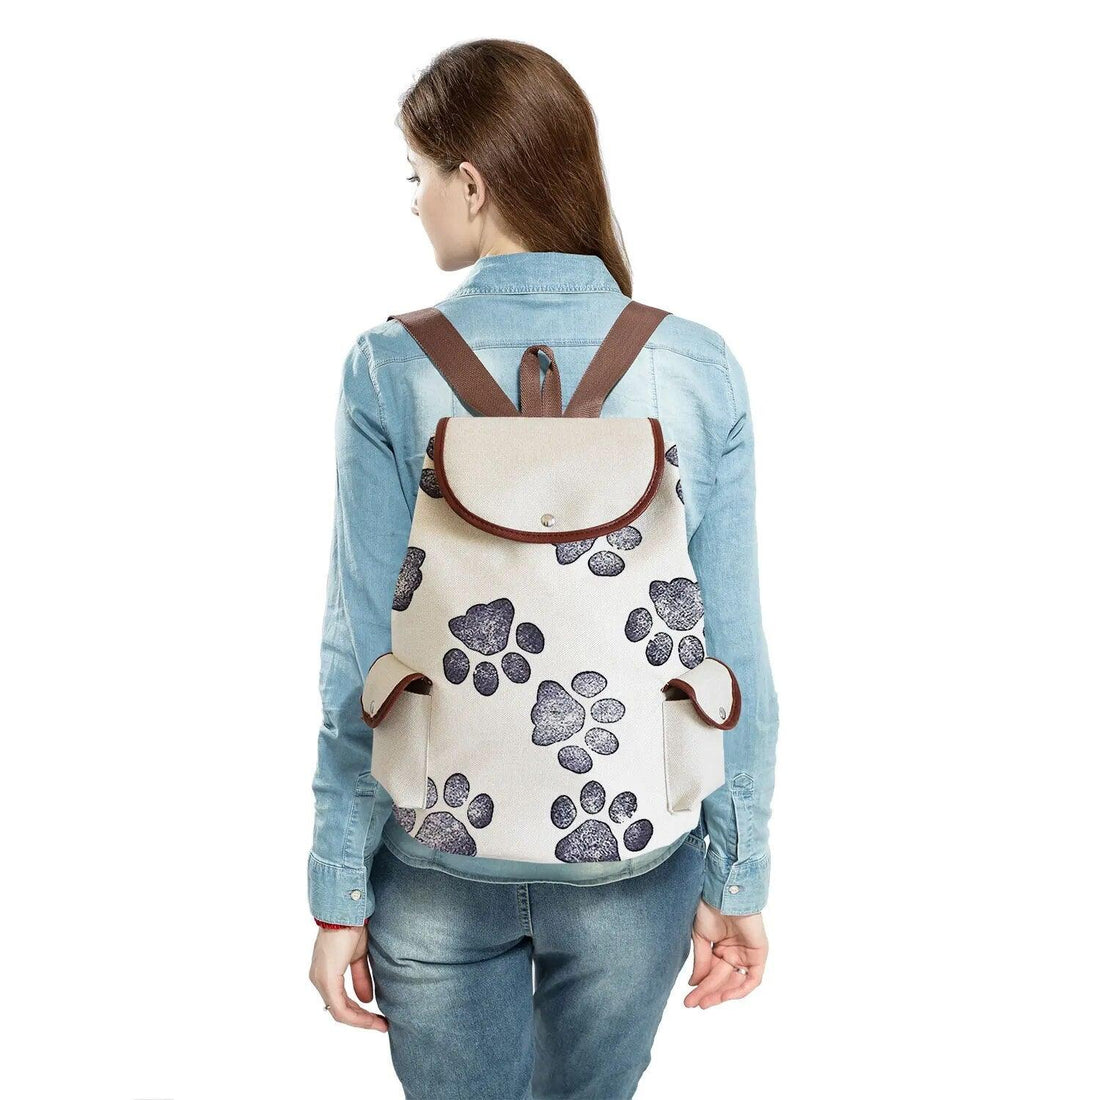 Paw Print Backpack, White, 18 Designs - Just Cats - Gifts for Cat Lovers